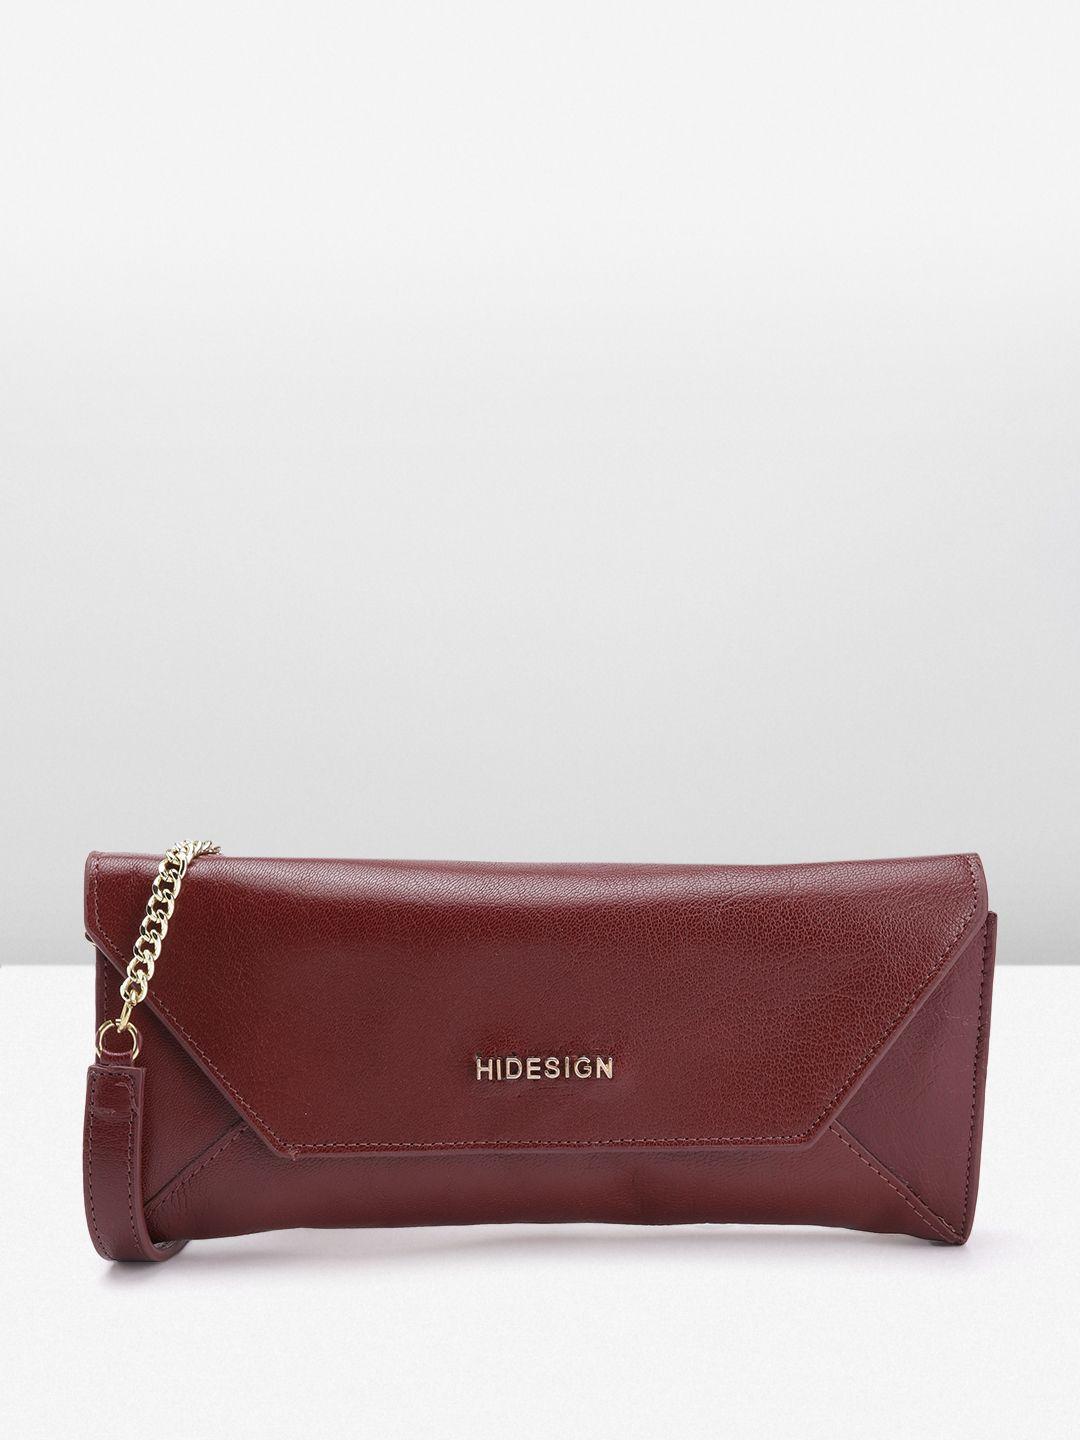 hidesign women leather envelope wallet with sling strap